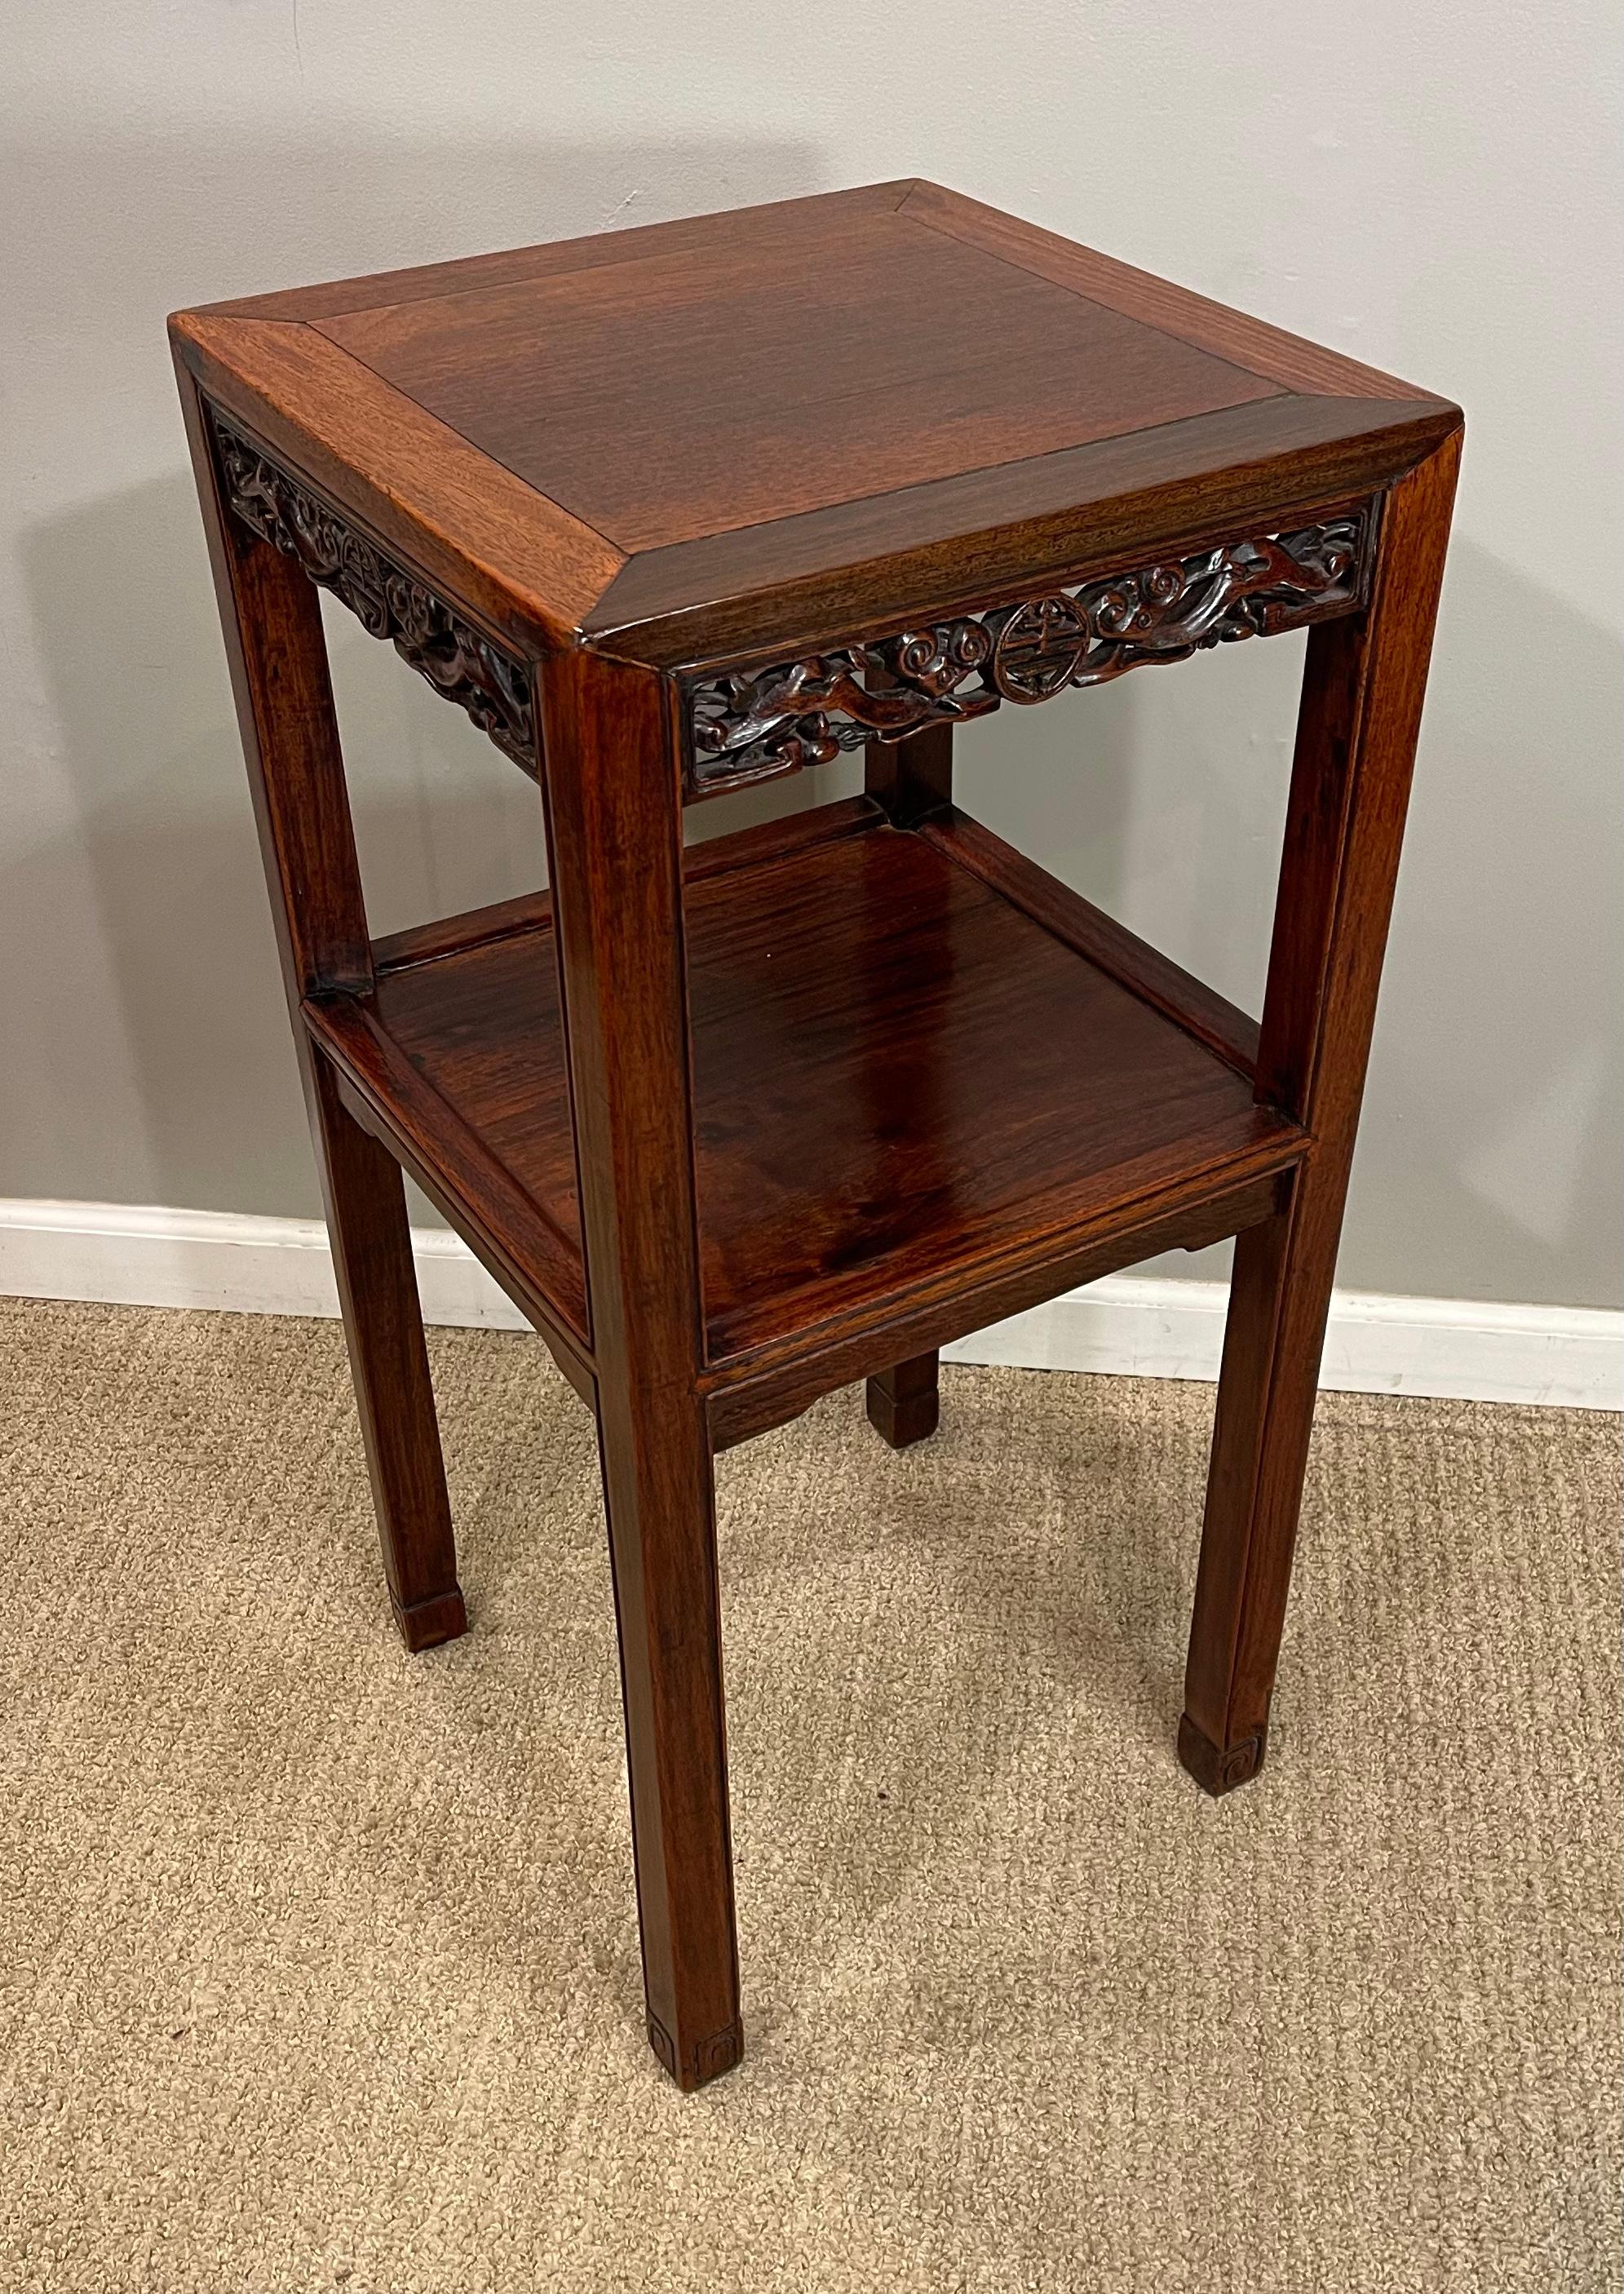 Chinese Hardwood 'Hungmu' Tea Table, Late 19th Century / Early 20th Century In Good Condition For Sale In New York, NY